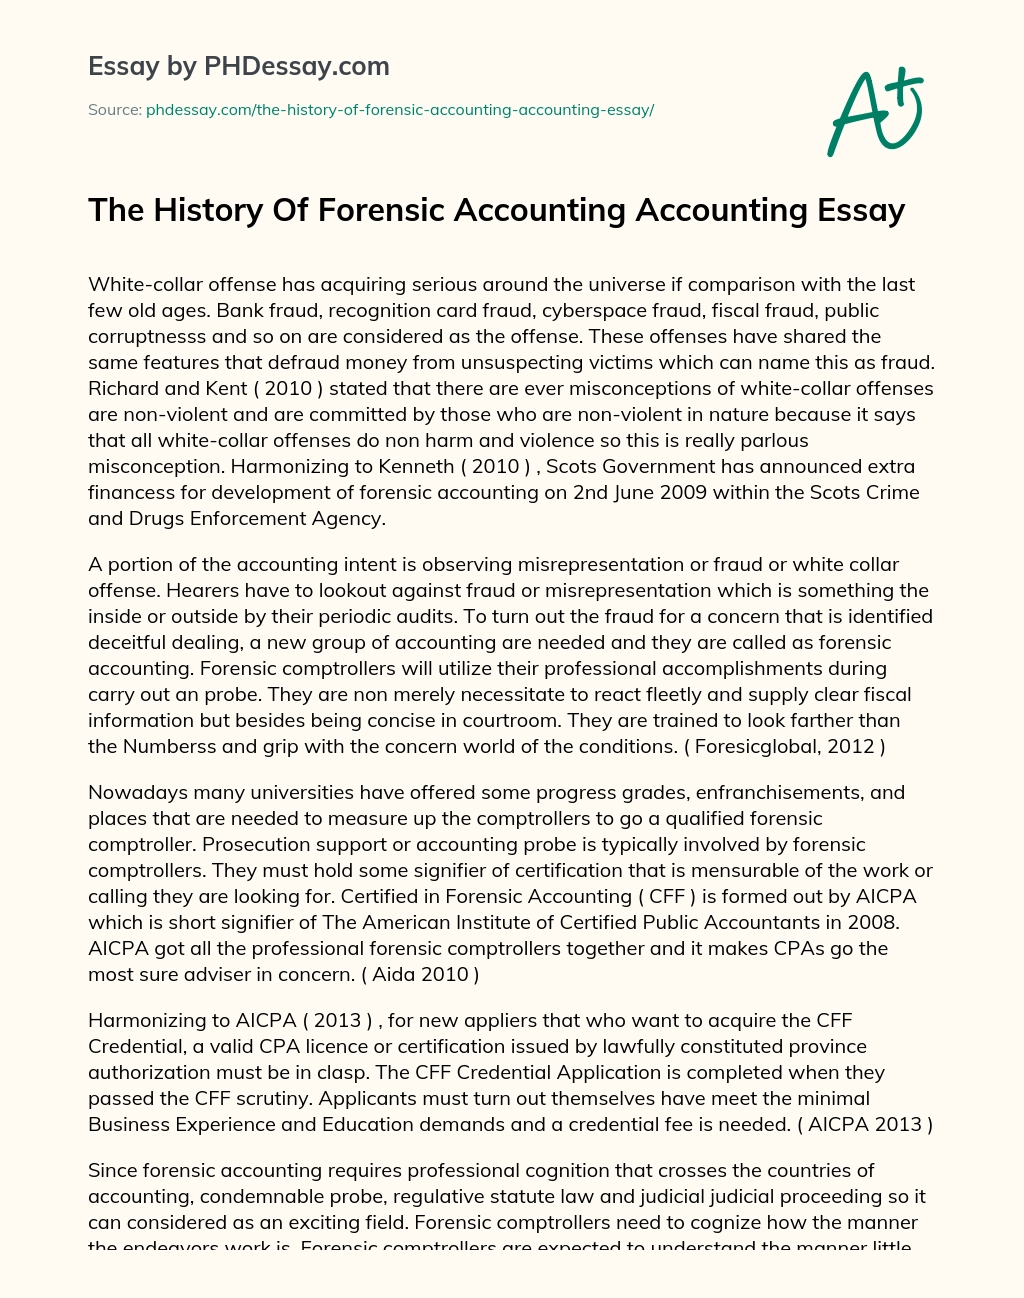 The History Of Forensic Accounting Accounting Essay essay